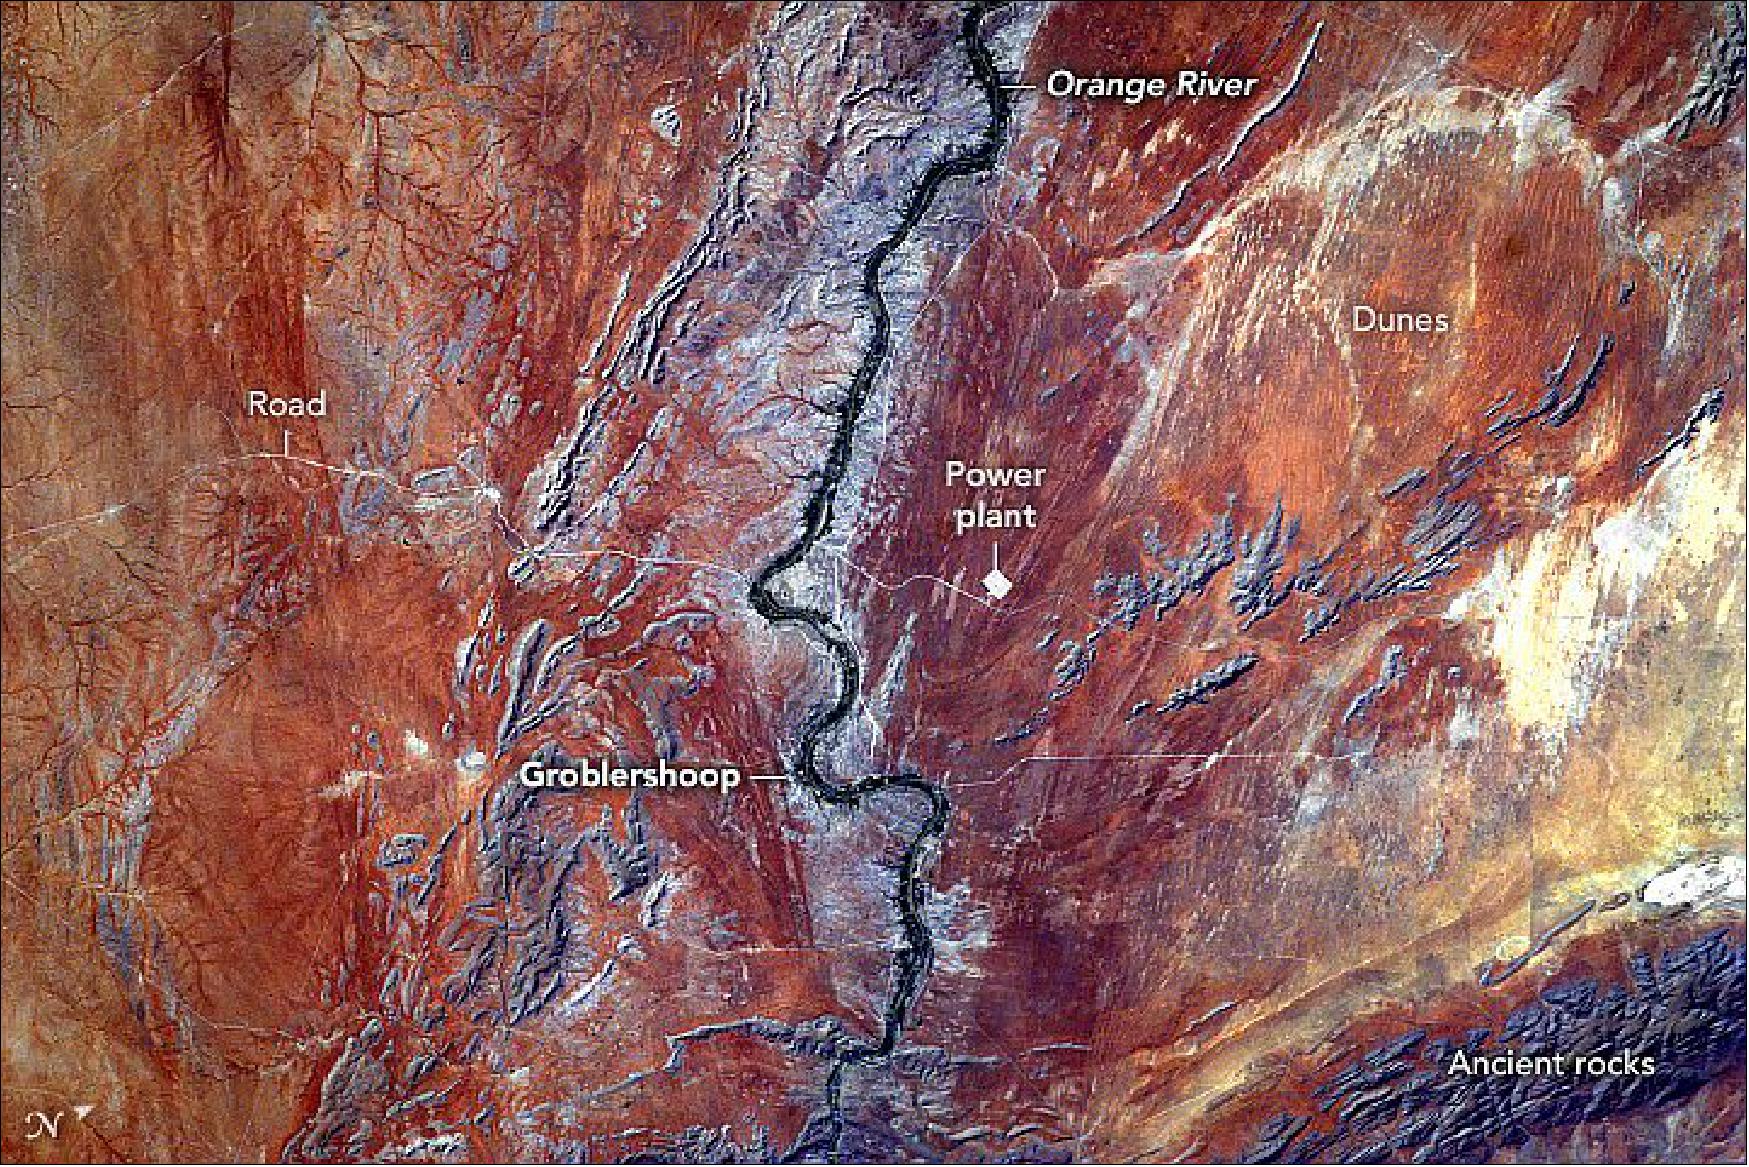 Figure 56: This EarthKAM photograph 313841 was acquired on November 15, 2020, with a Nikon D2X DSLR digital camera using a 180 millimeter lens. The photo has been enhanced to improve contrast. It is provided by the Sally Ride EarthKAM@Space Camp on the International Space Station. The caption is provided by the Earth Science and Remote Sensing Unit, NASA Johnson Space Center. EarthKAM (Earth Knowledge Acquired by Middle school students) is a NASA educational outreach program that enables students, teachers, and the public to learn about Earth from the unique perspective of space. During Sally Ride EarthKAM missions, middle school students around the world request images of specific locations on Earth (image credit: NASA Earth Observatory, caption by M. Justin Wilkinson)